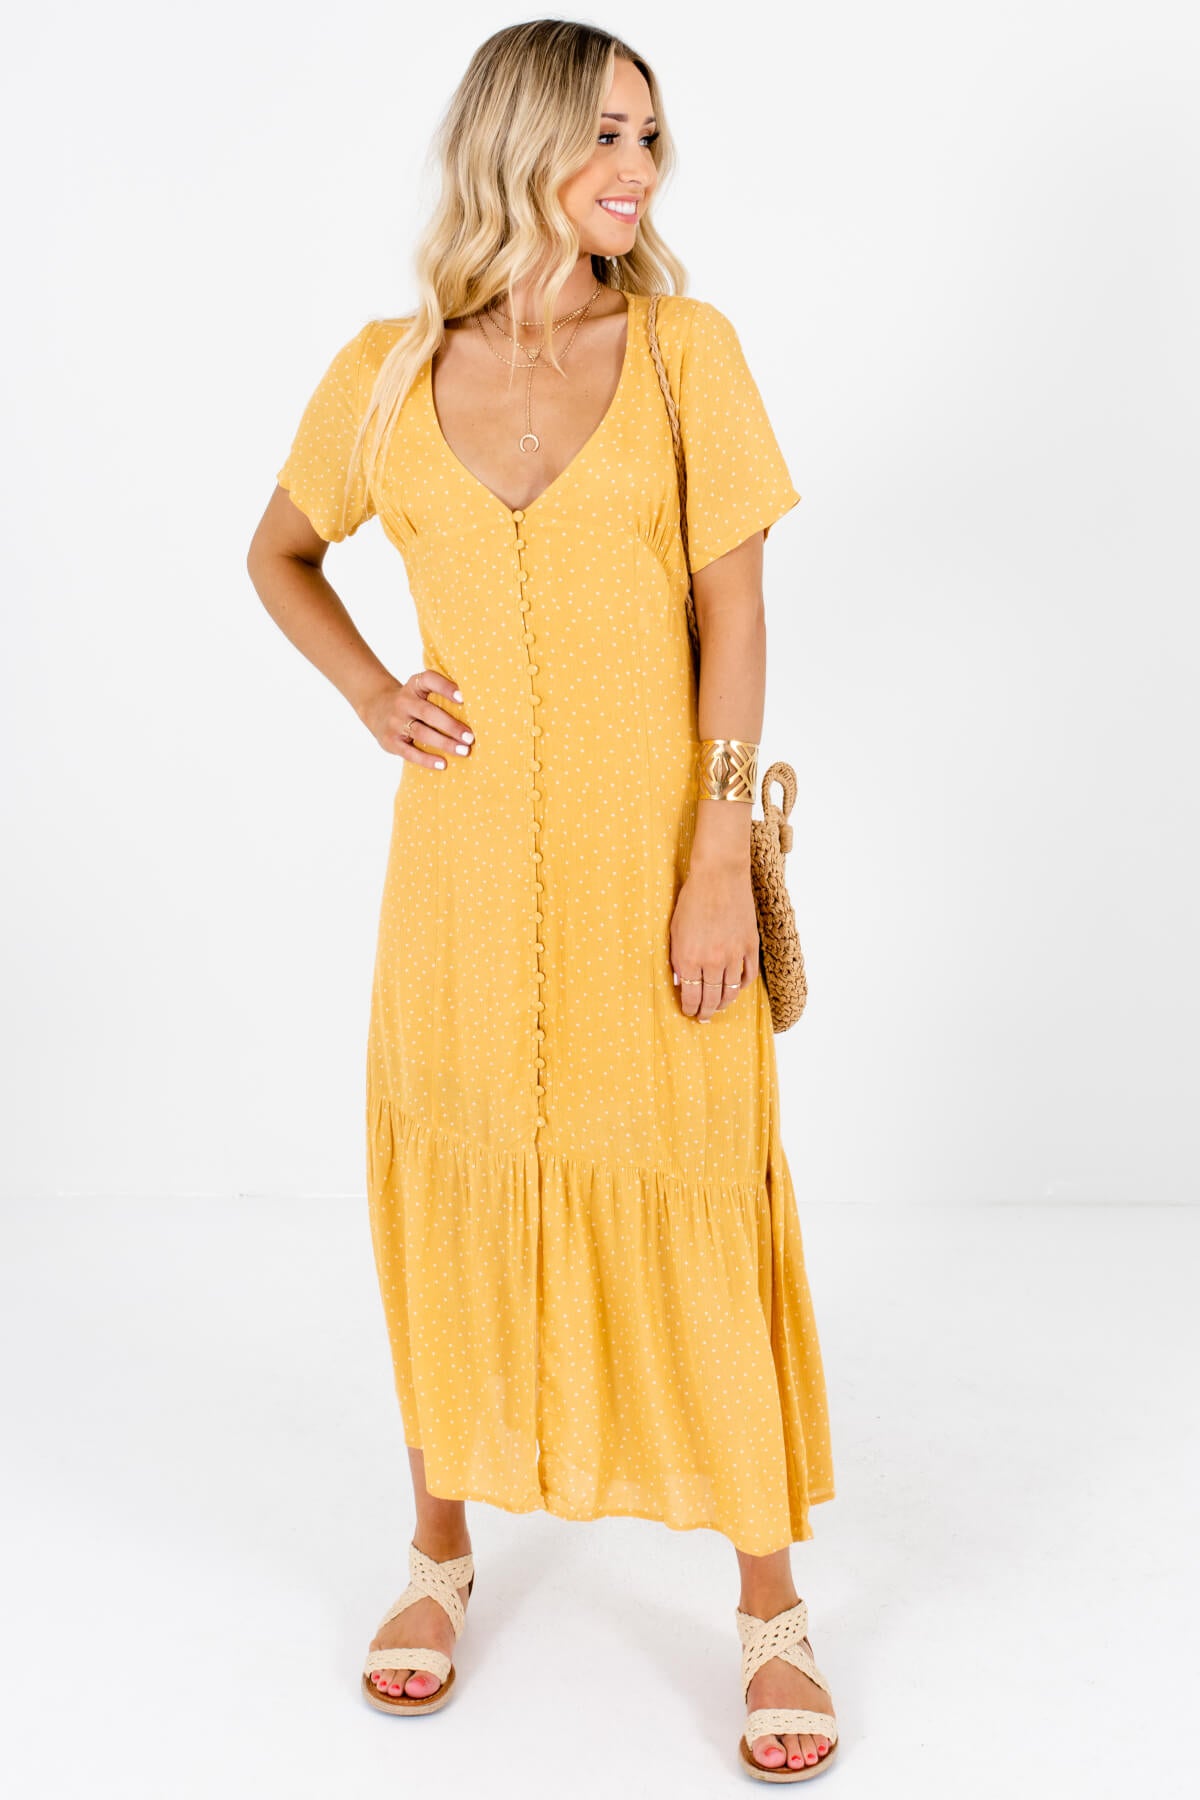 Mustard Yellow Polka Dot Button Up Maxi Dresses Boutique